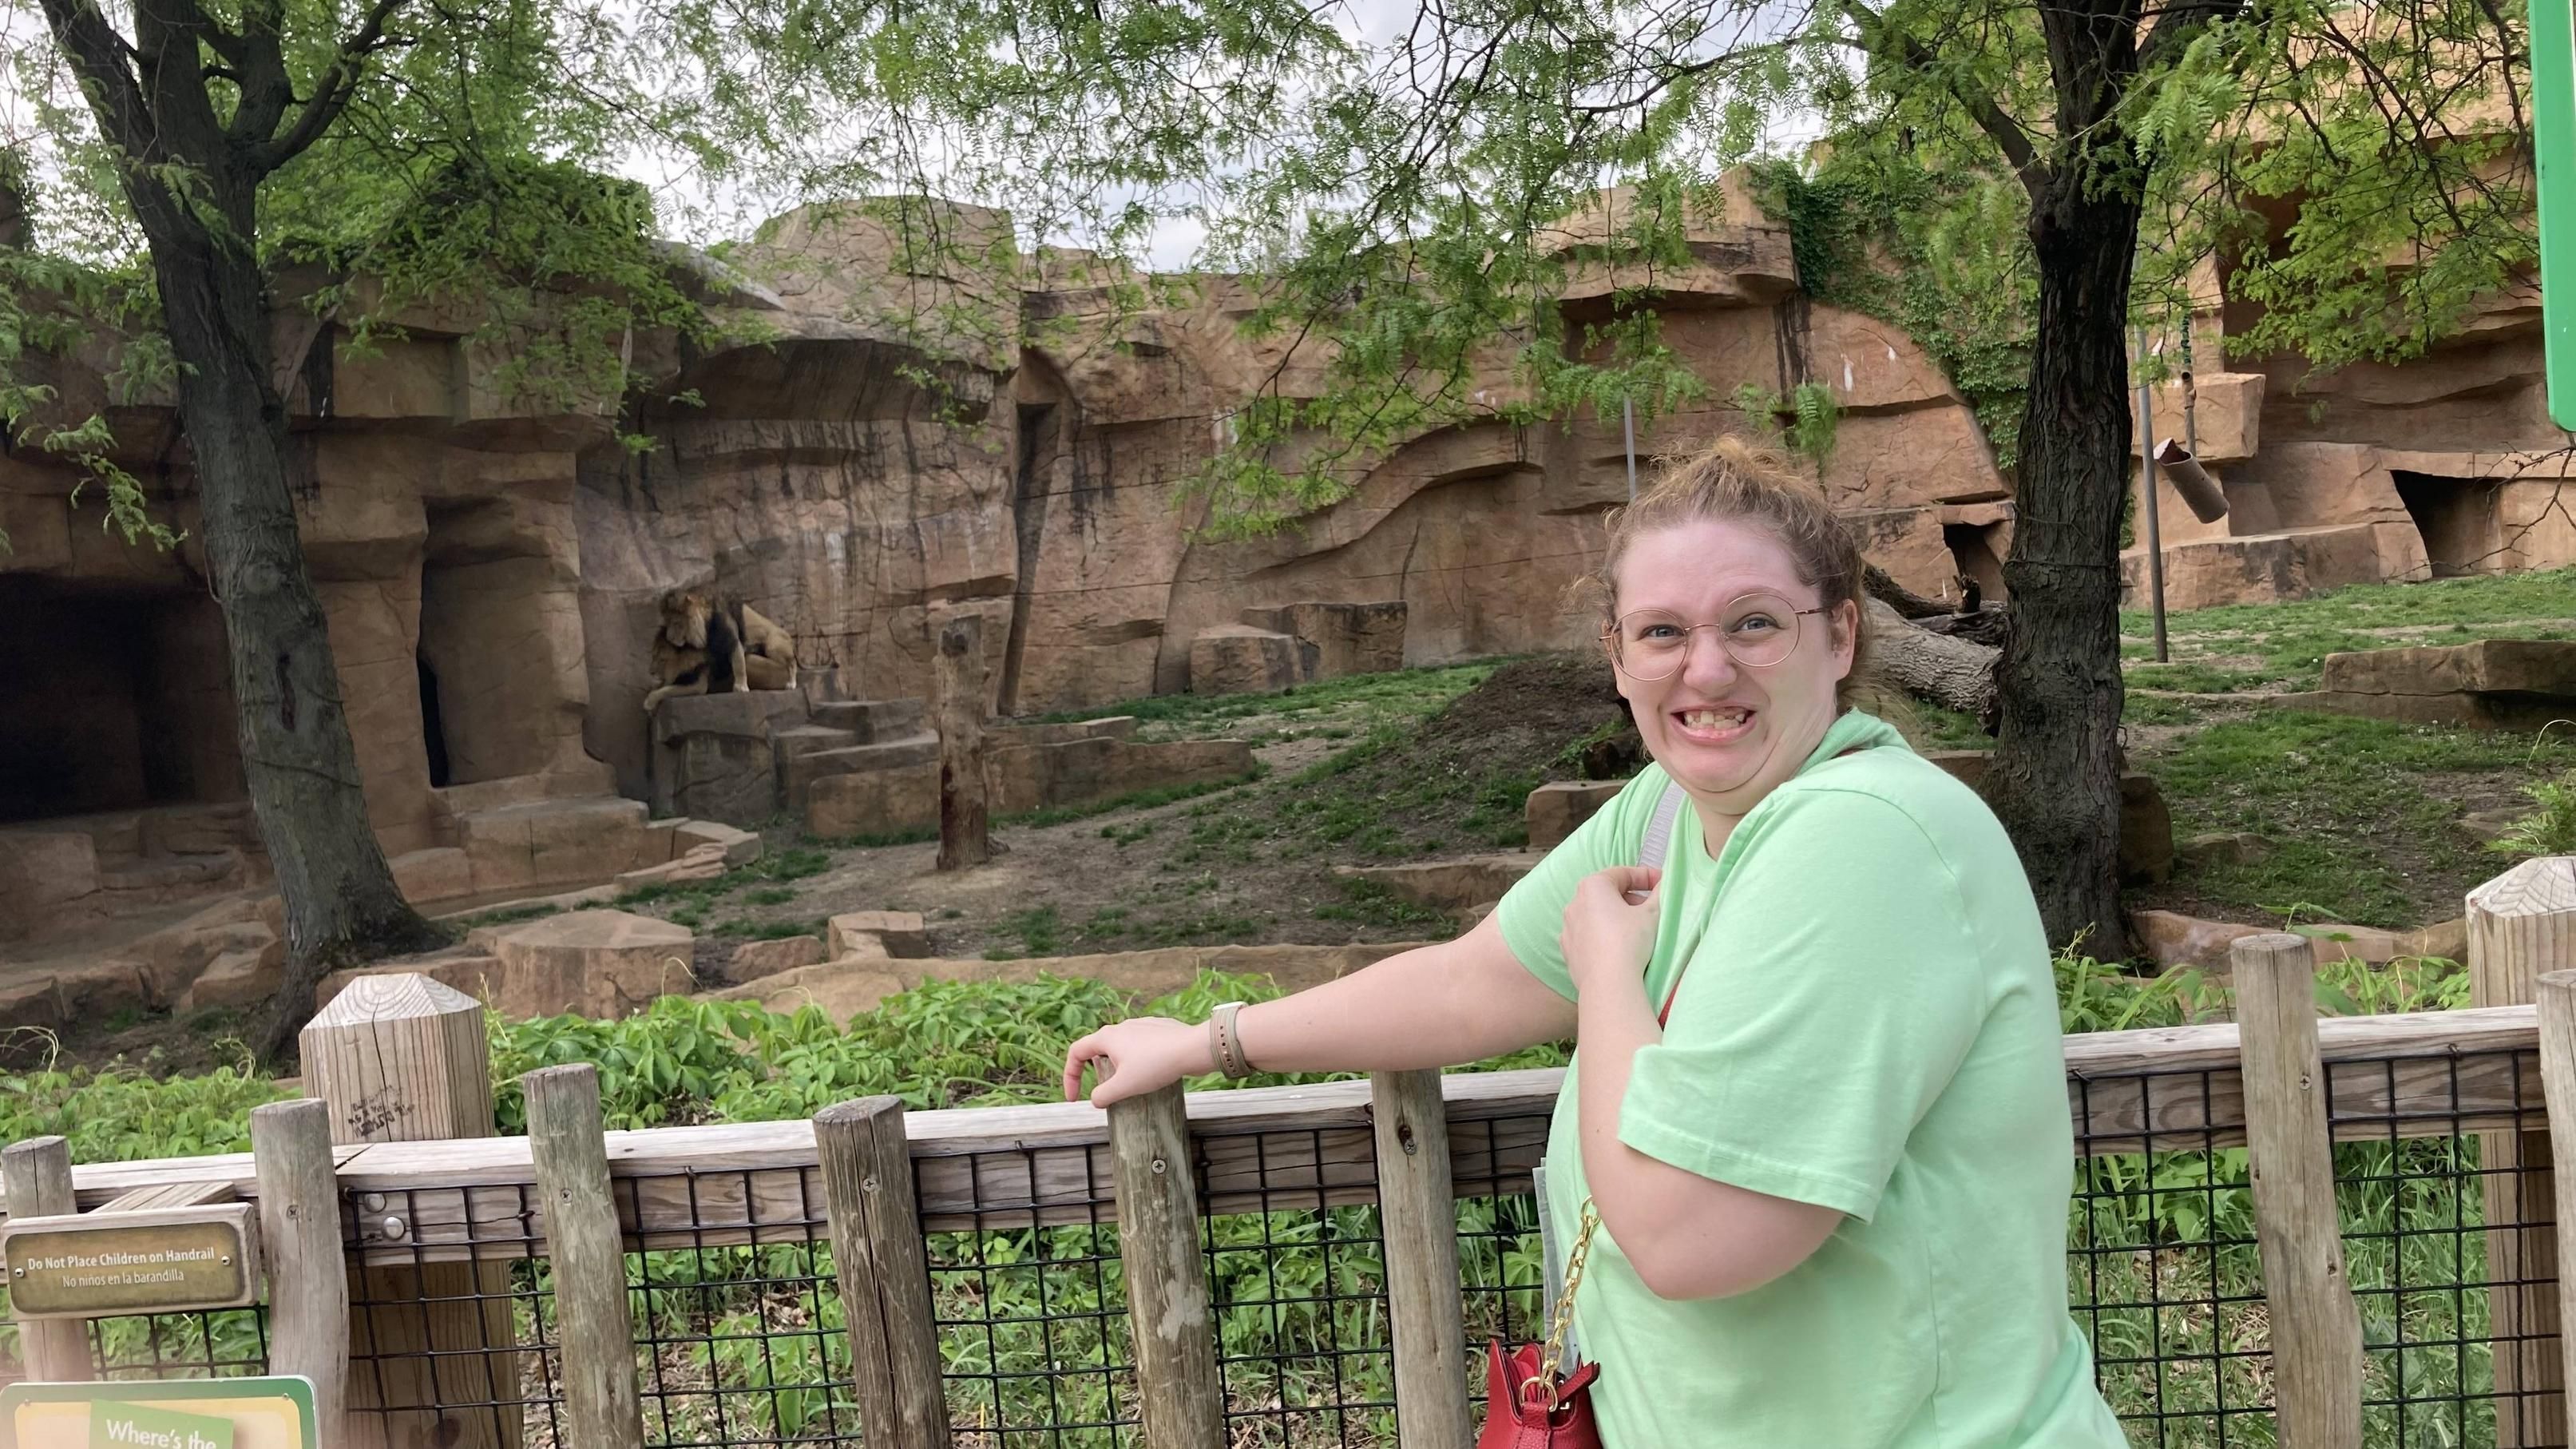 I was so excited to take a picture with the lions, and realized at the last second that they were “having fun”